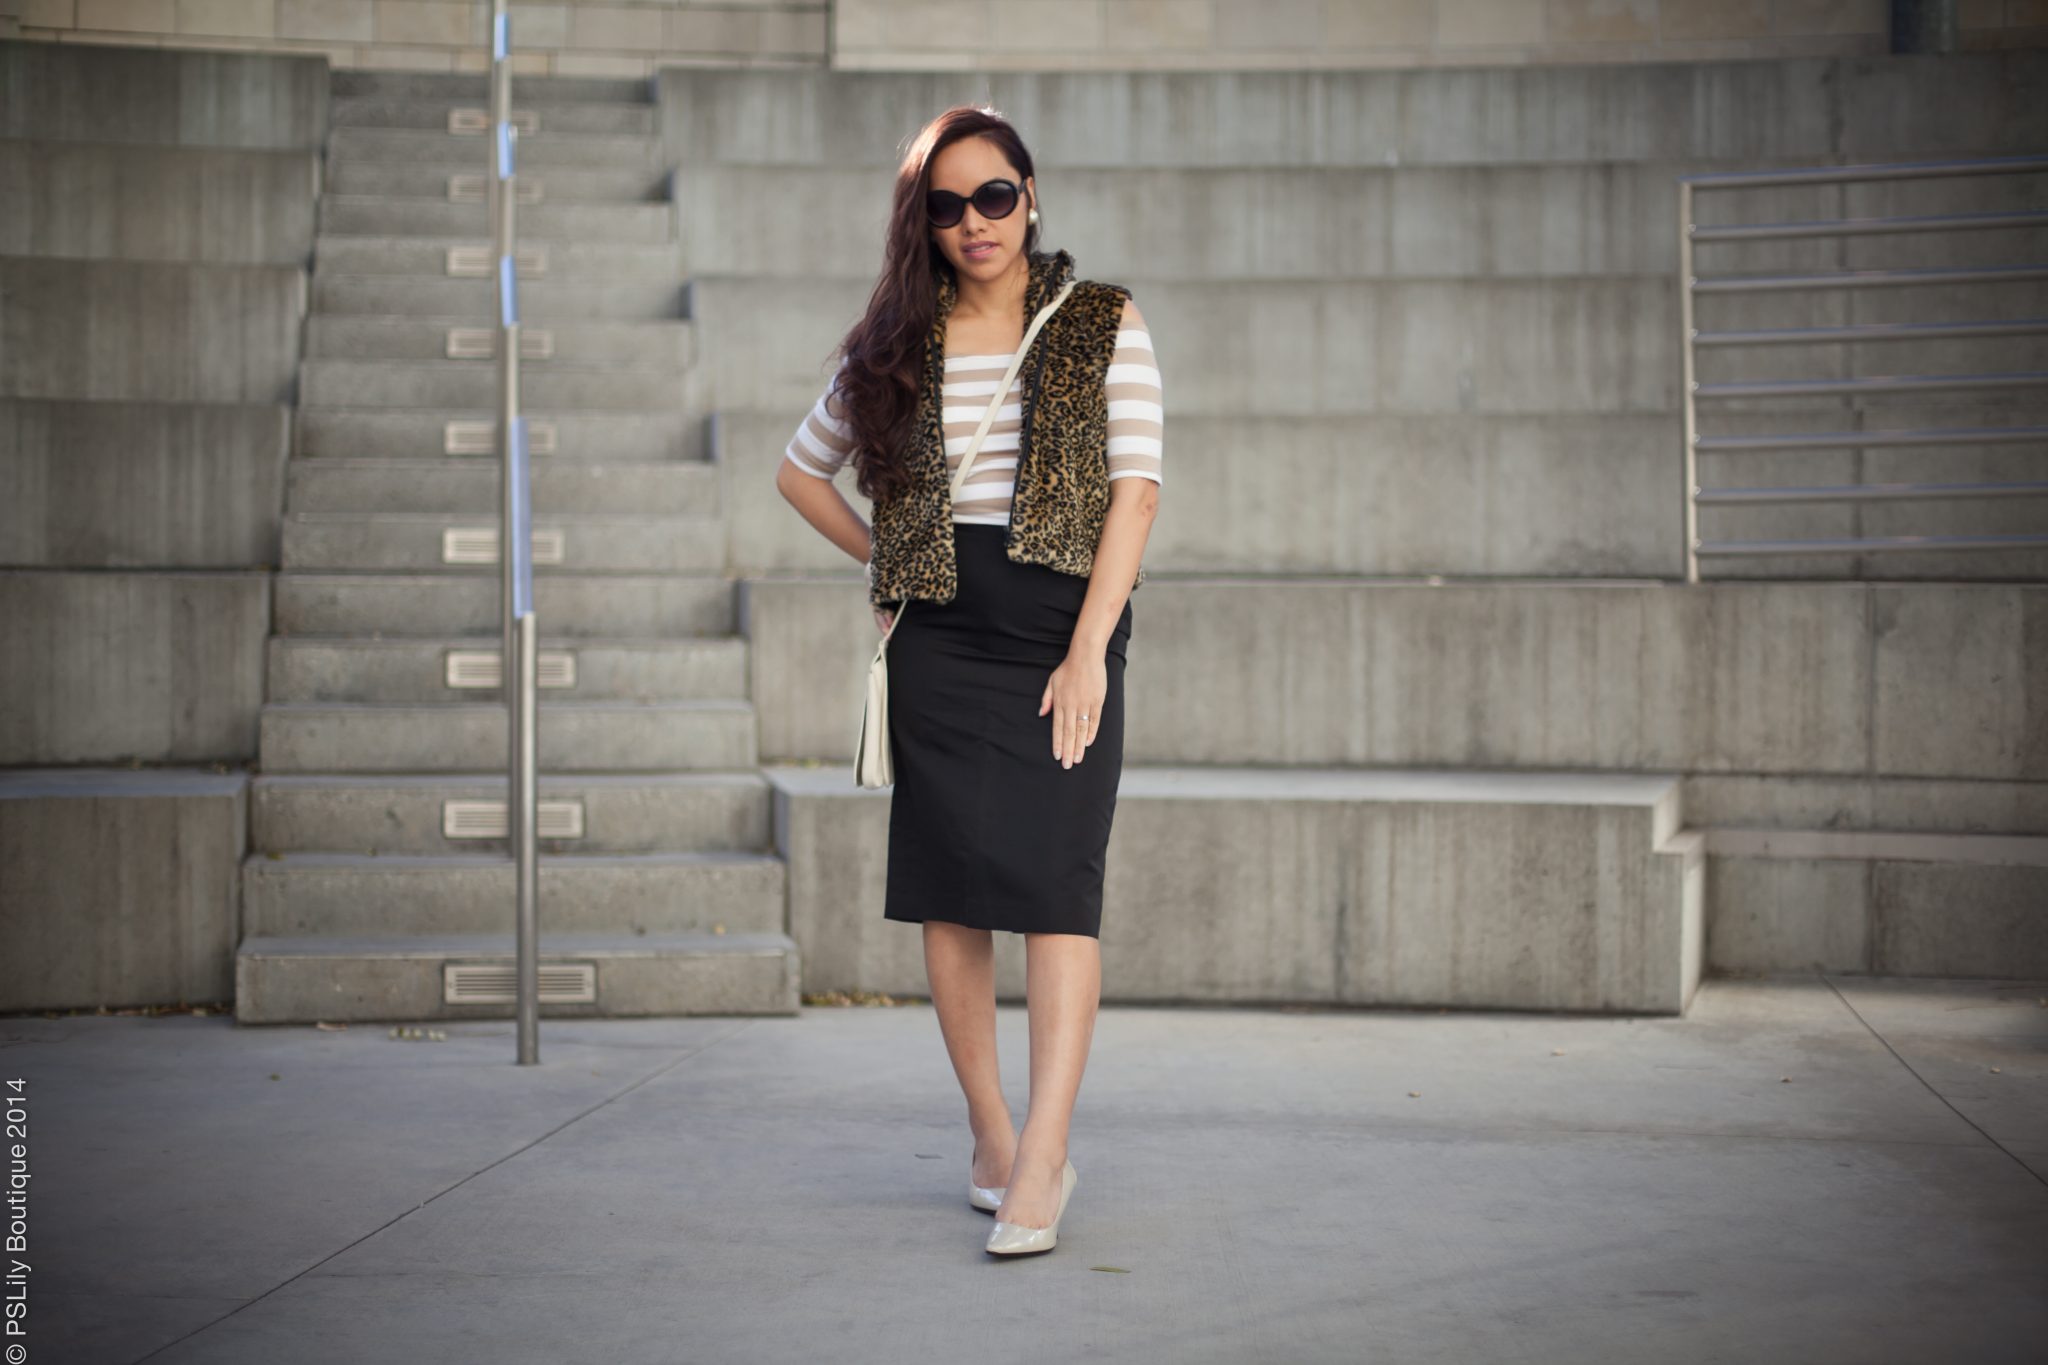 Banana Republic black midi pencil skirt, street style, spring 2014 outfit ideas, spring, @pslilyboutique on Instagram